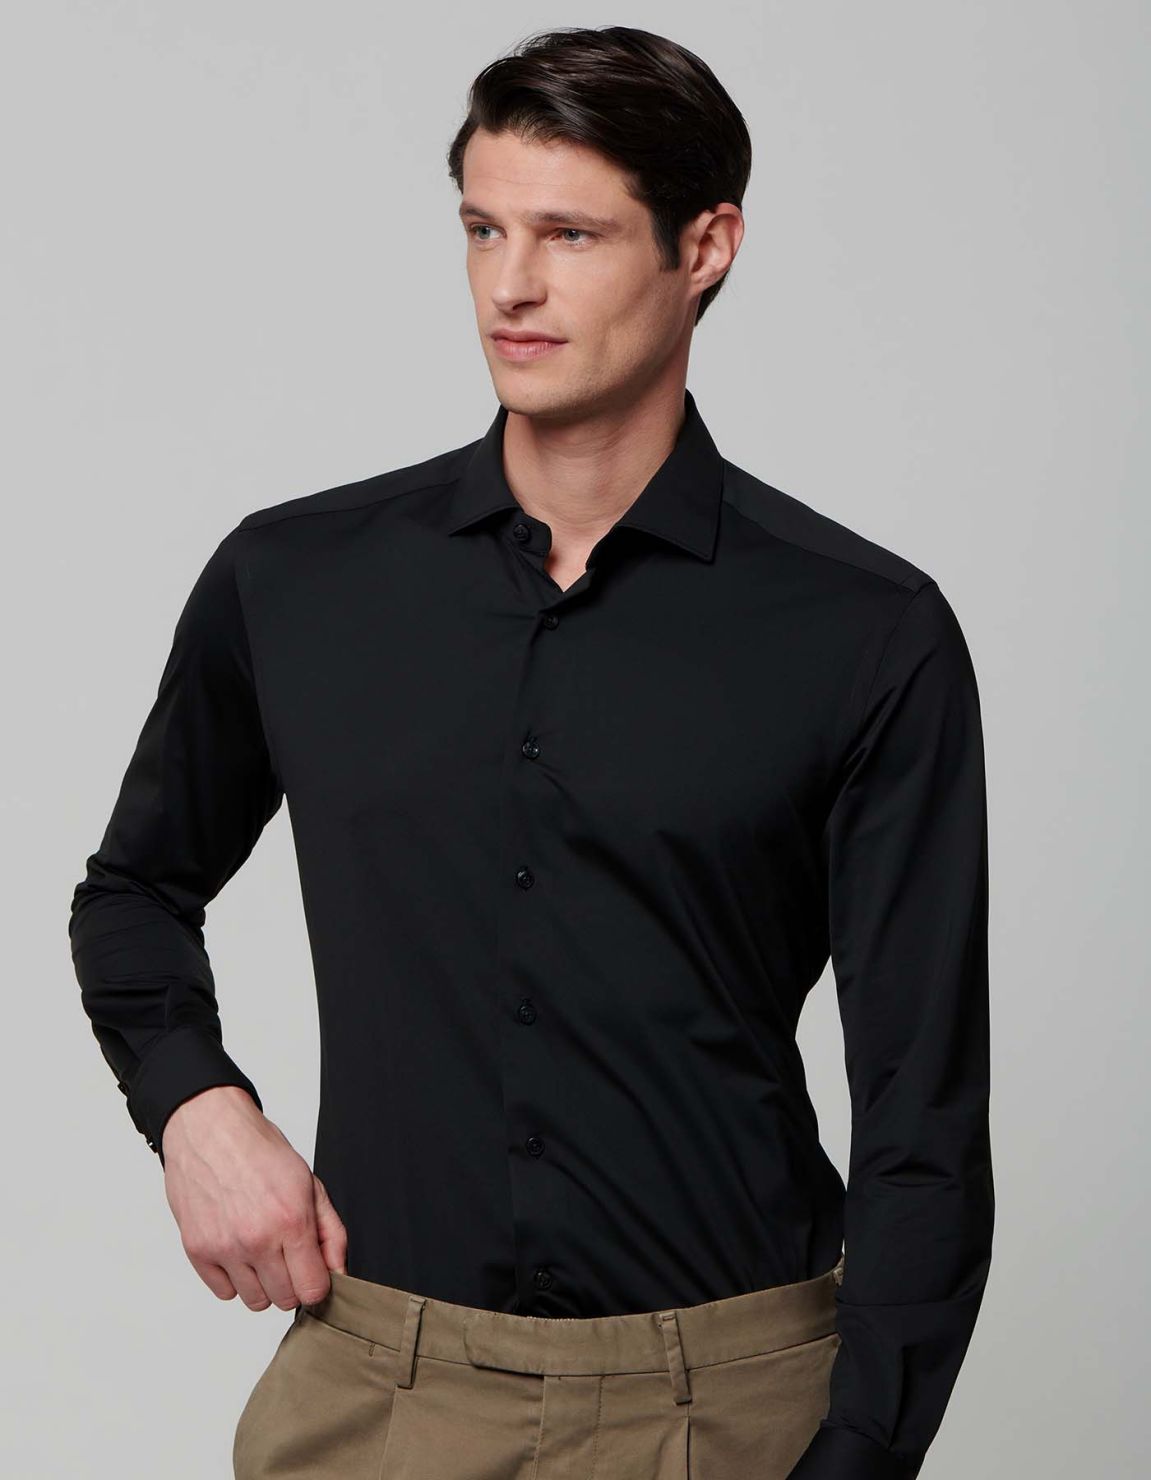 Black Twill Solid colour Shirt Collar small cutaway for Male - Xacus